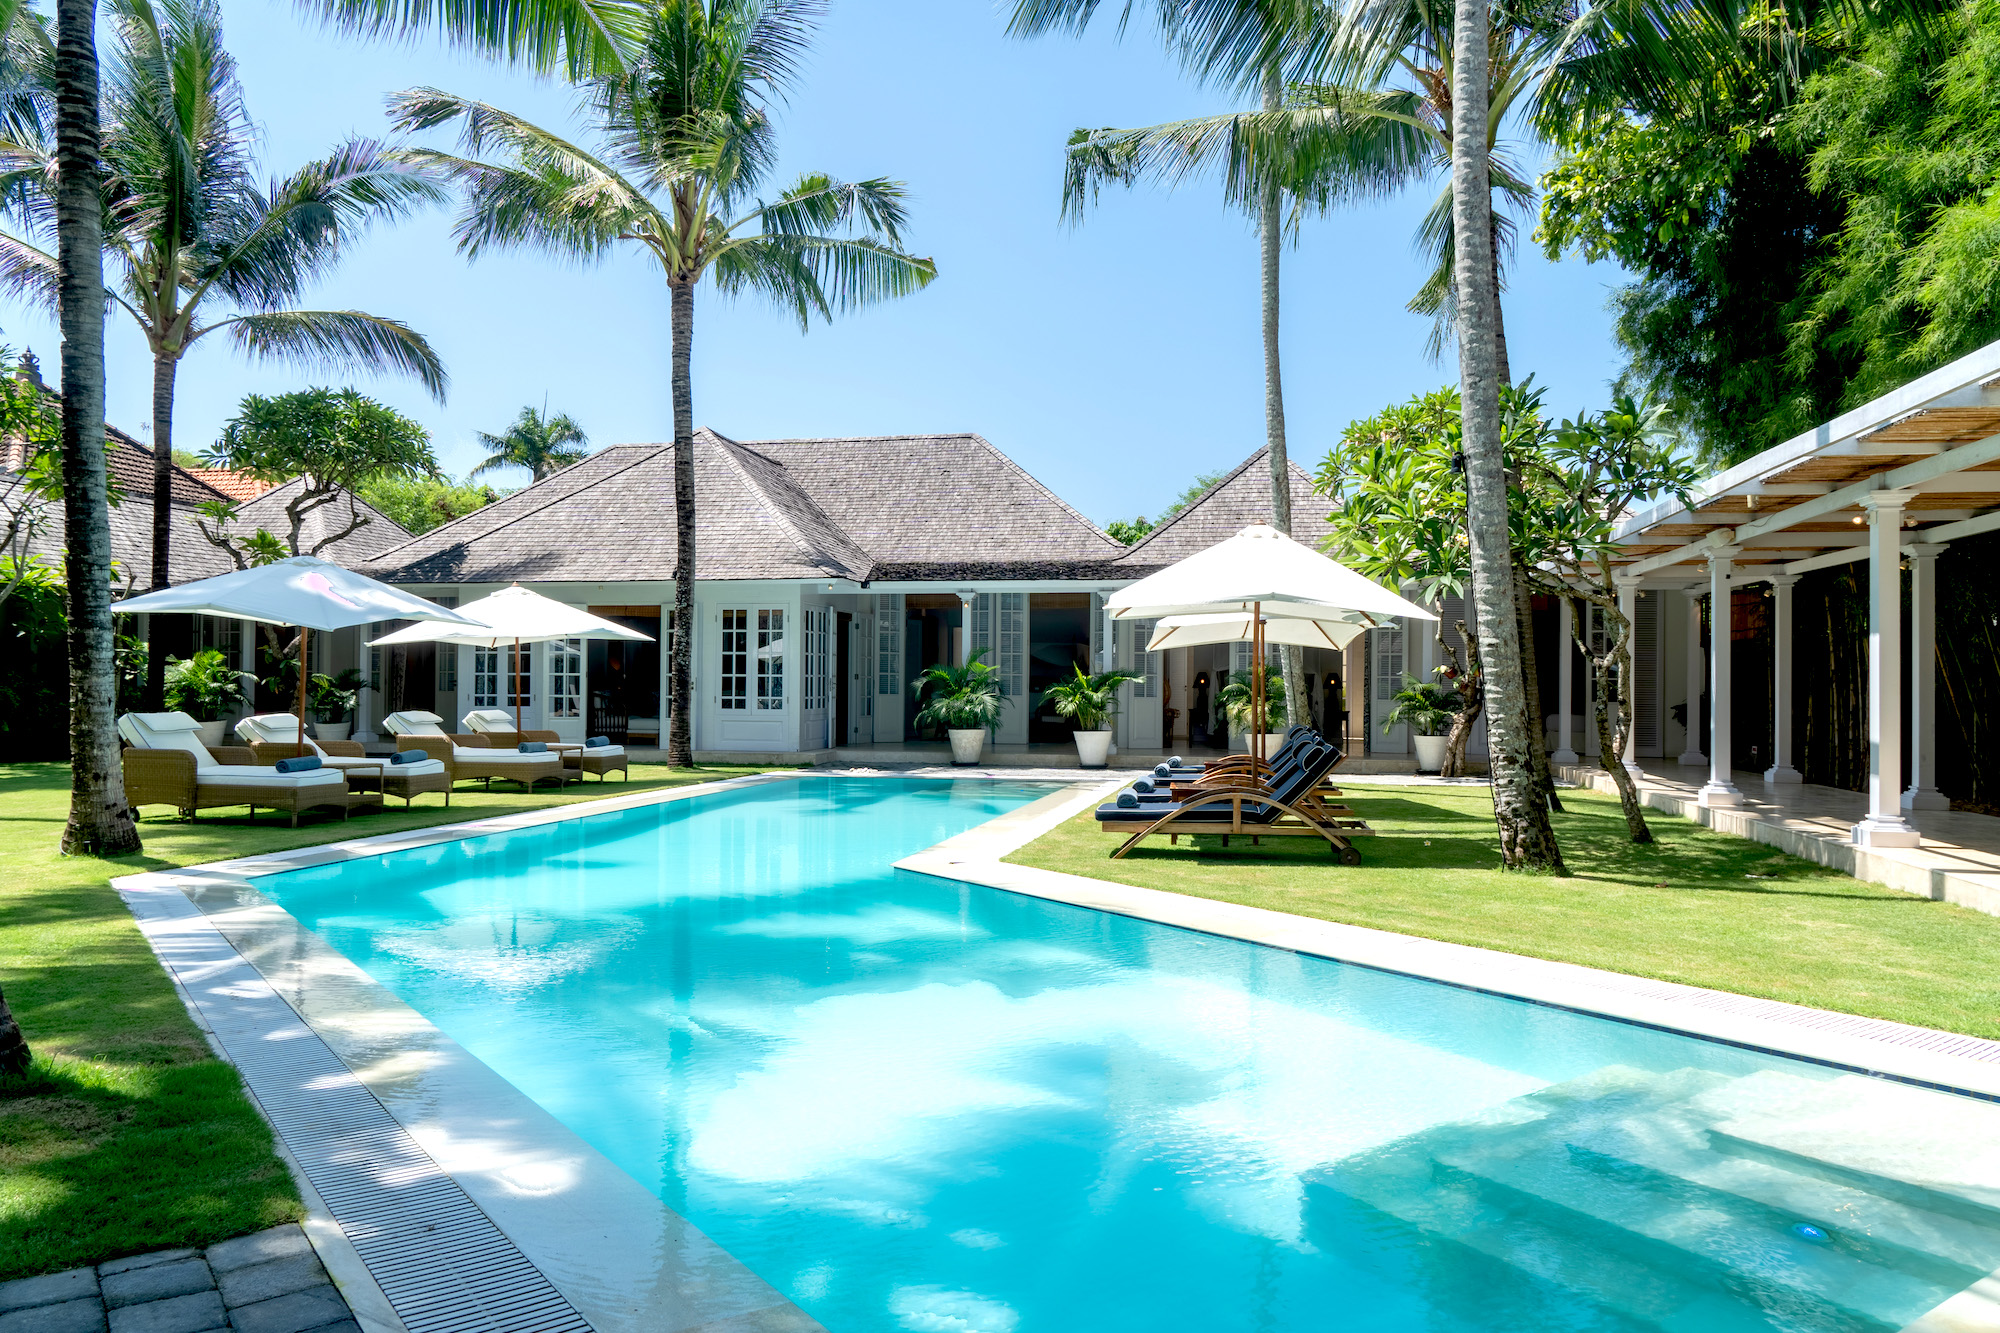 Tour Bali’s Best Villas Without Leaving Home - Ministry of Villas